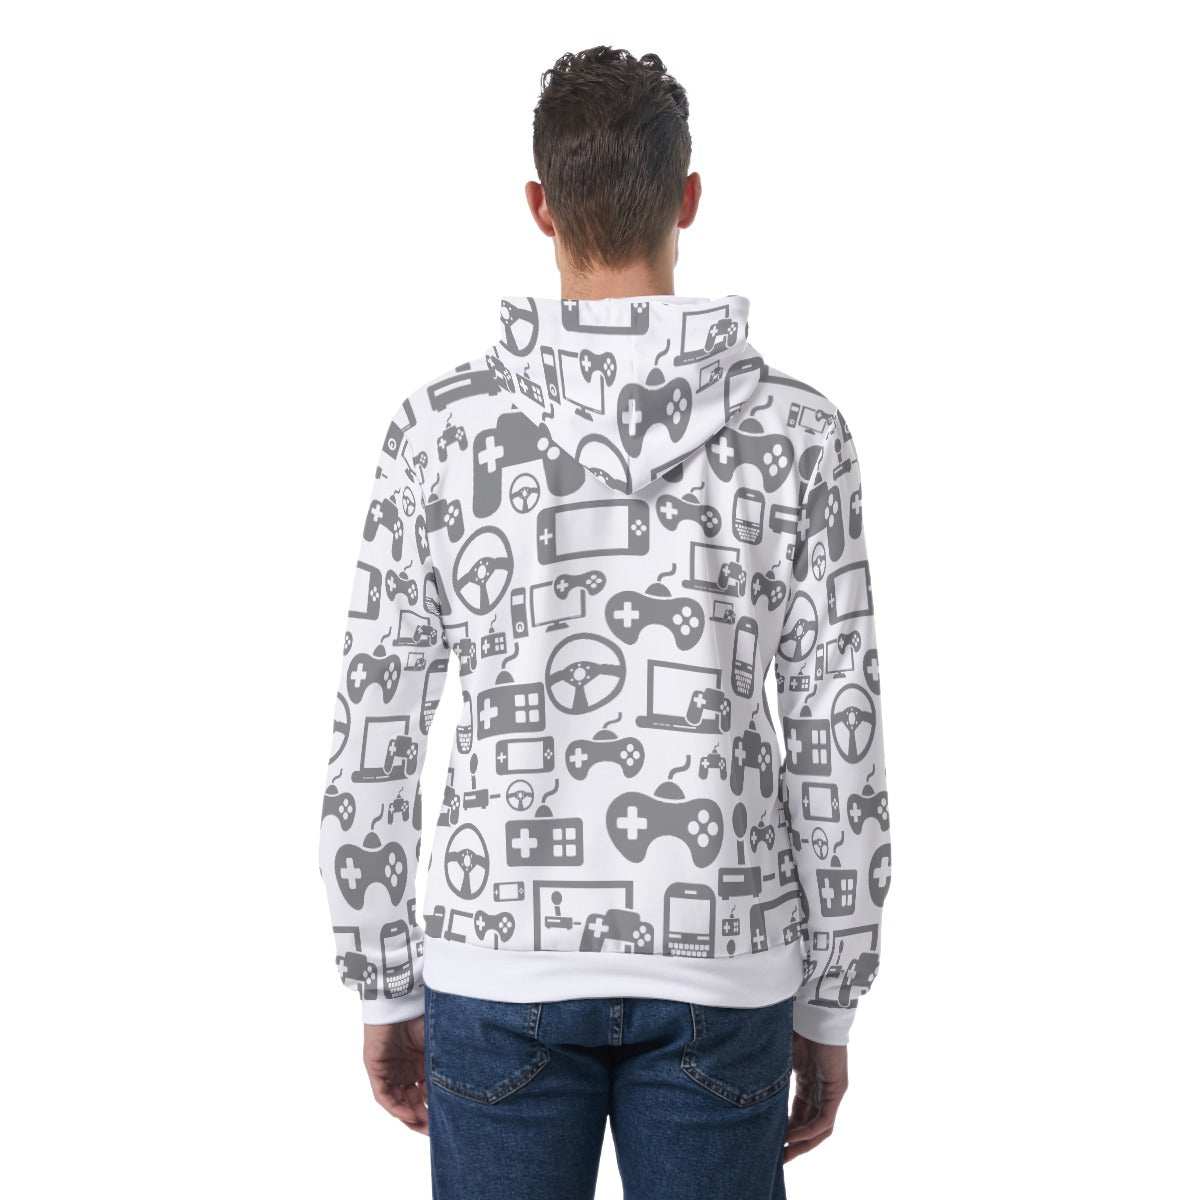 "GAME SESSION" Hoodie